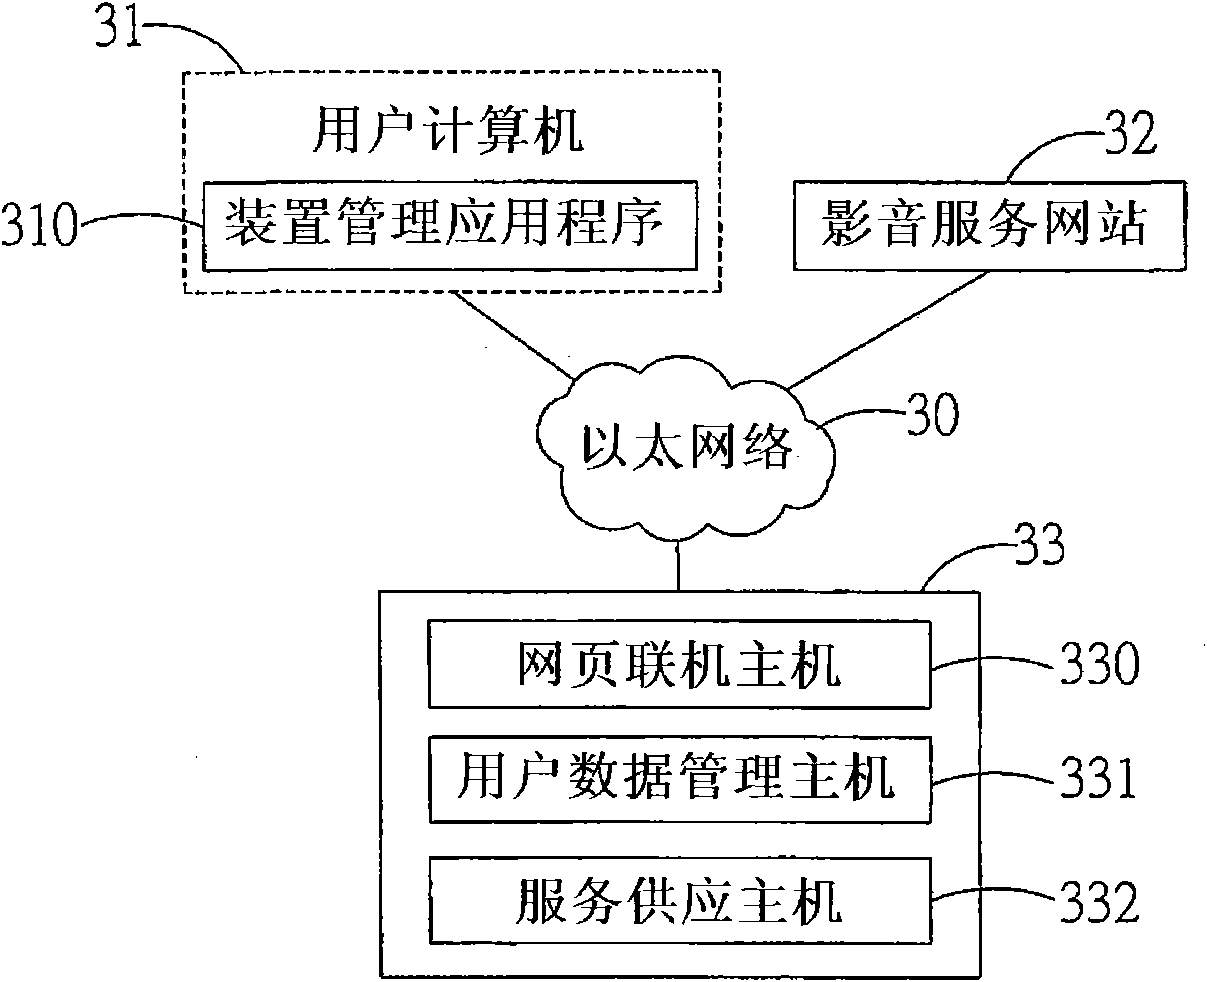 Network service management system and method applied to different terminal equipment